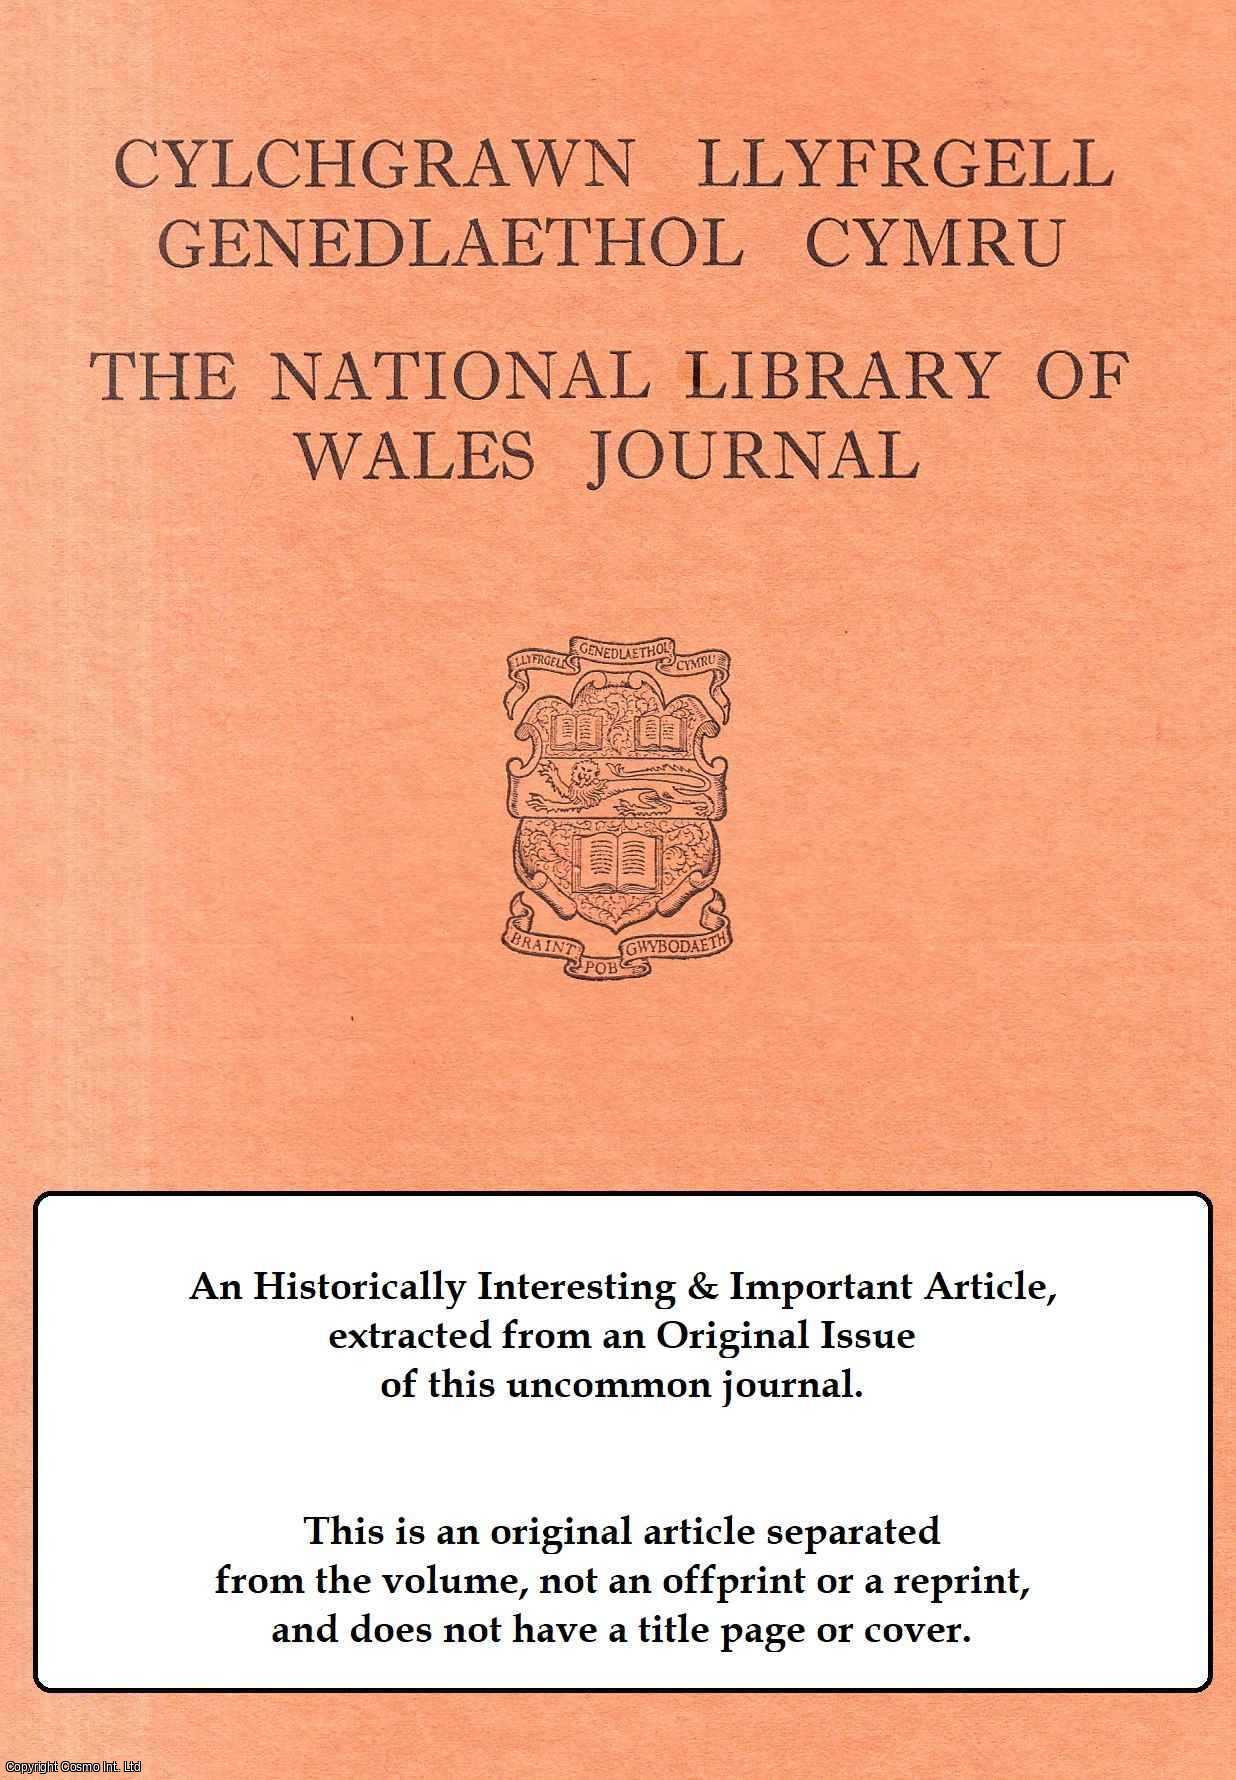 Thomas Jones - Pre-Reformation Welsh Versions of The Scriptures. An original article from The National Library of Wales Journal, 1946.